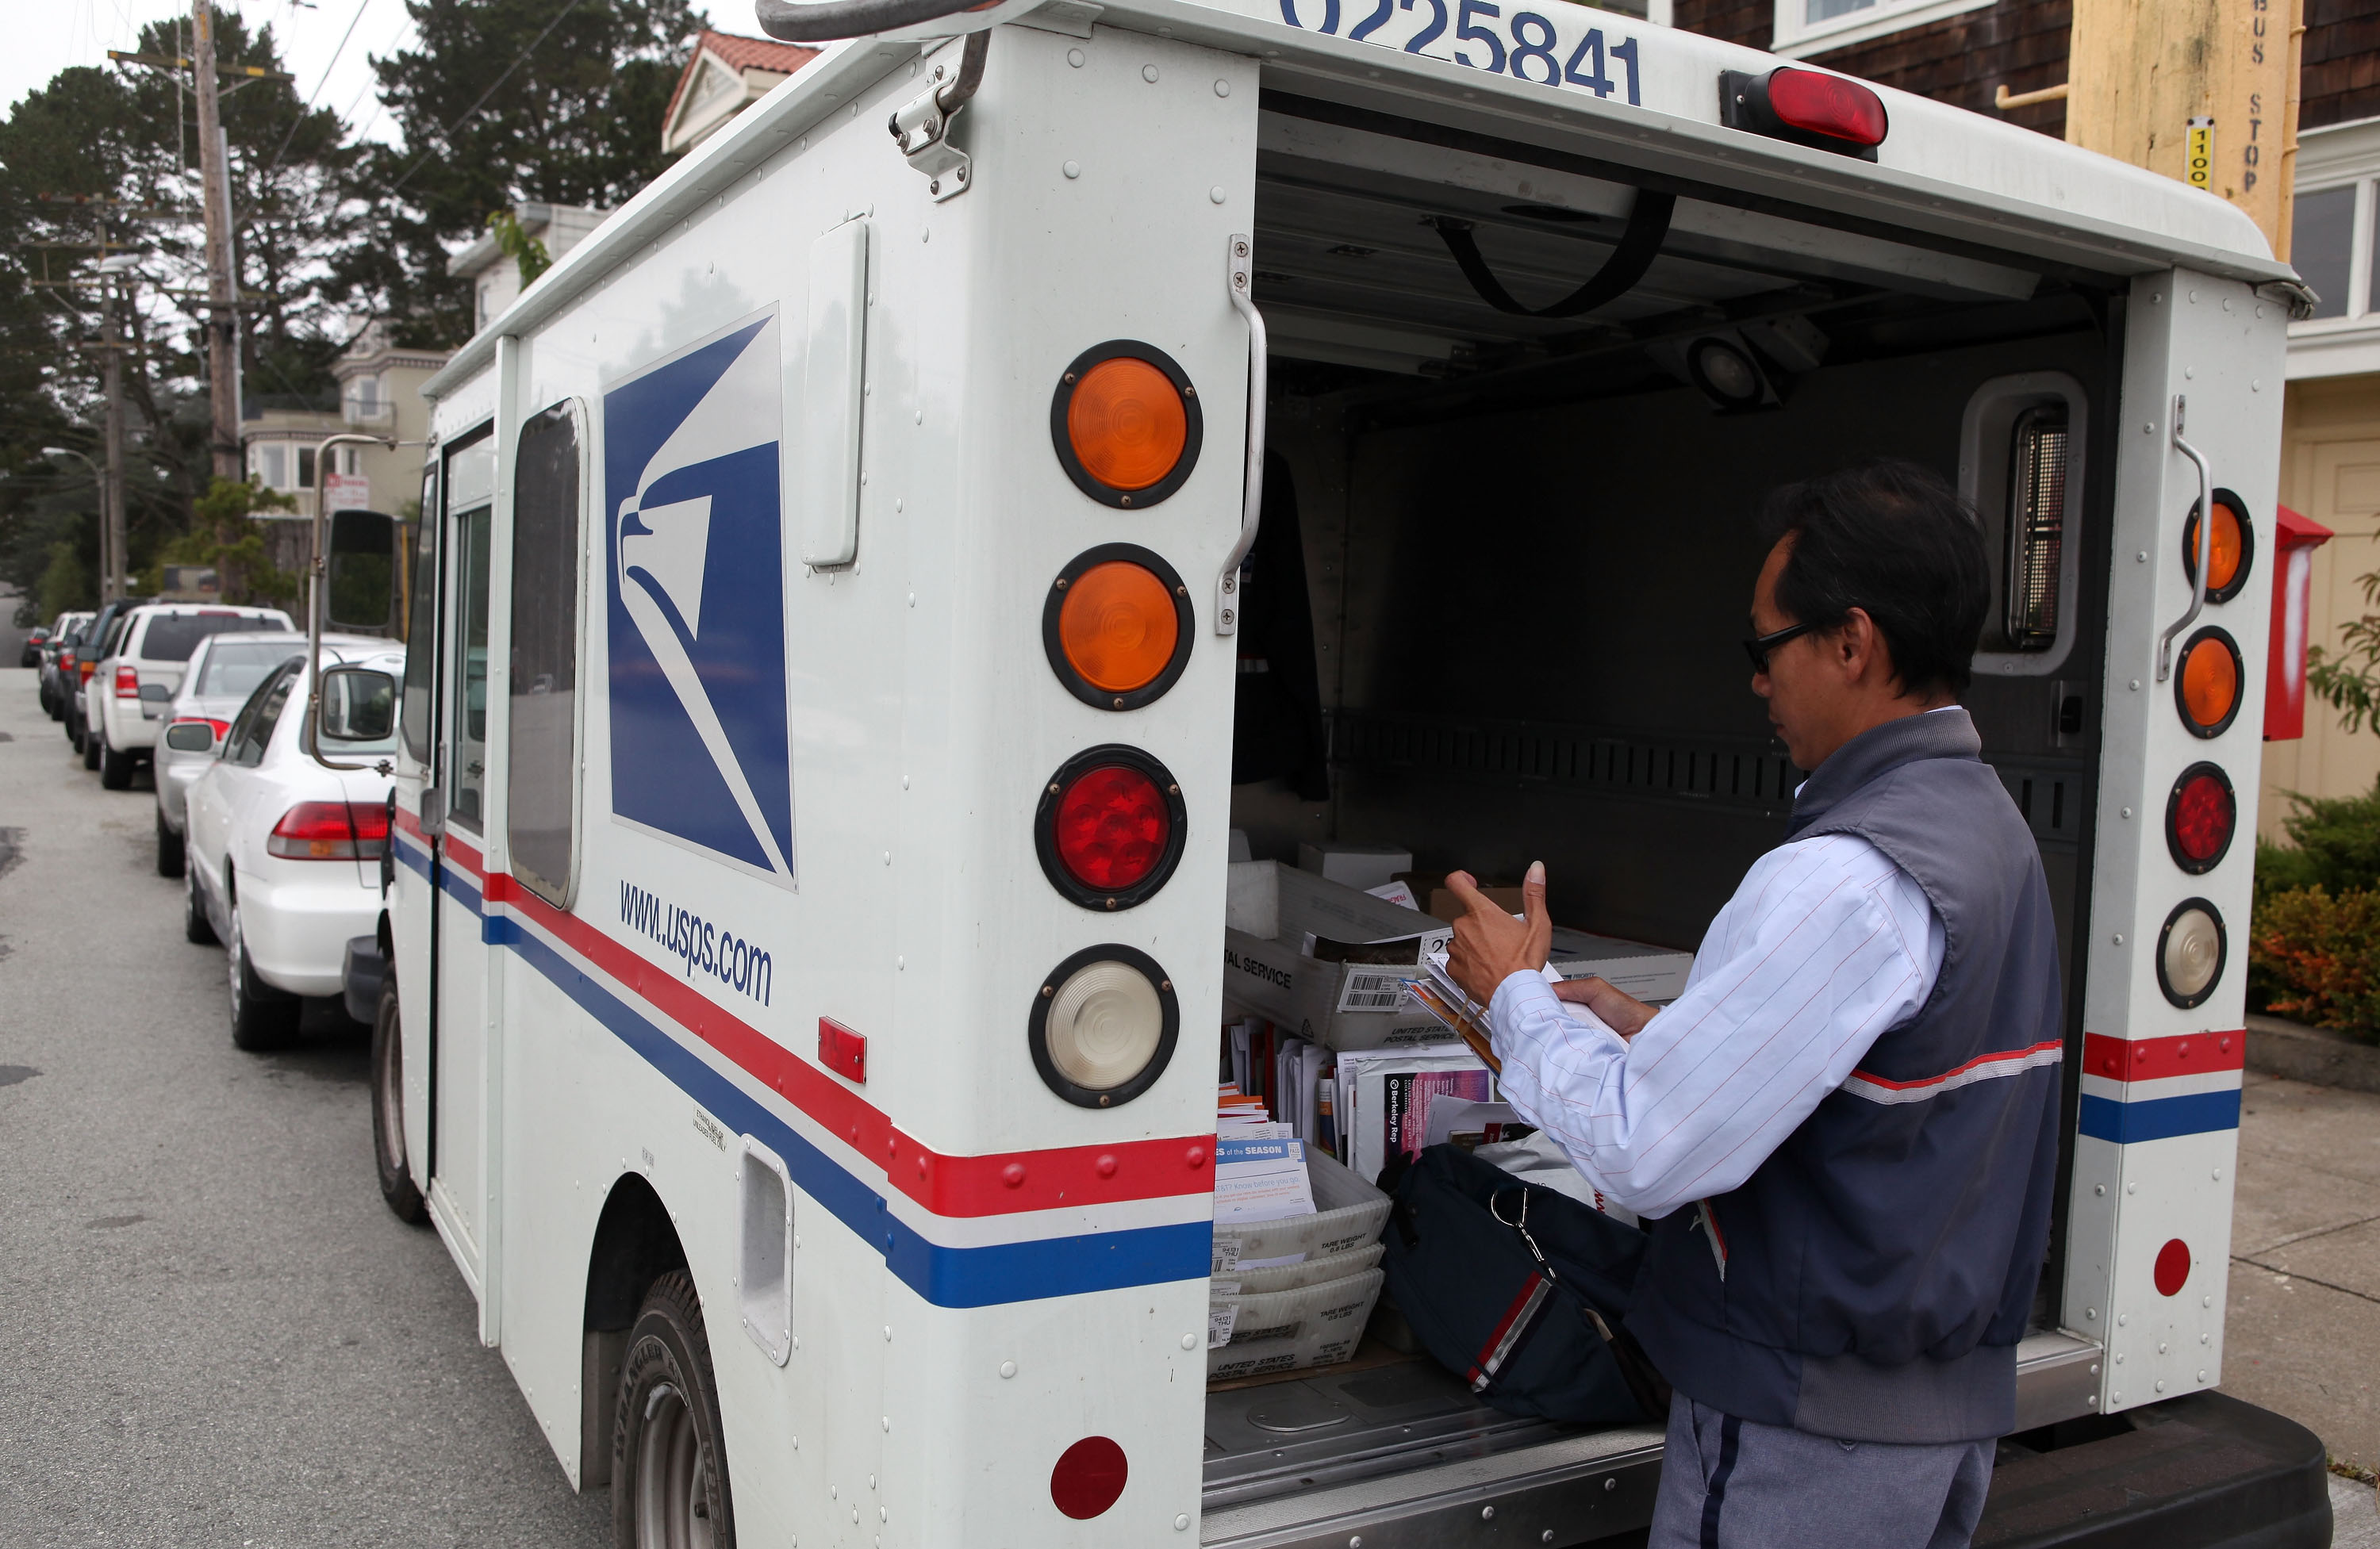 The U.S. Postal Service Will Email You Your Mail Each Morning | Fortune